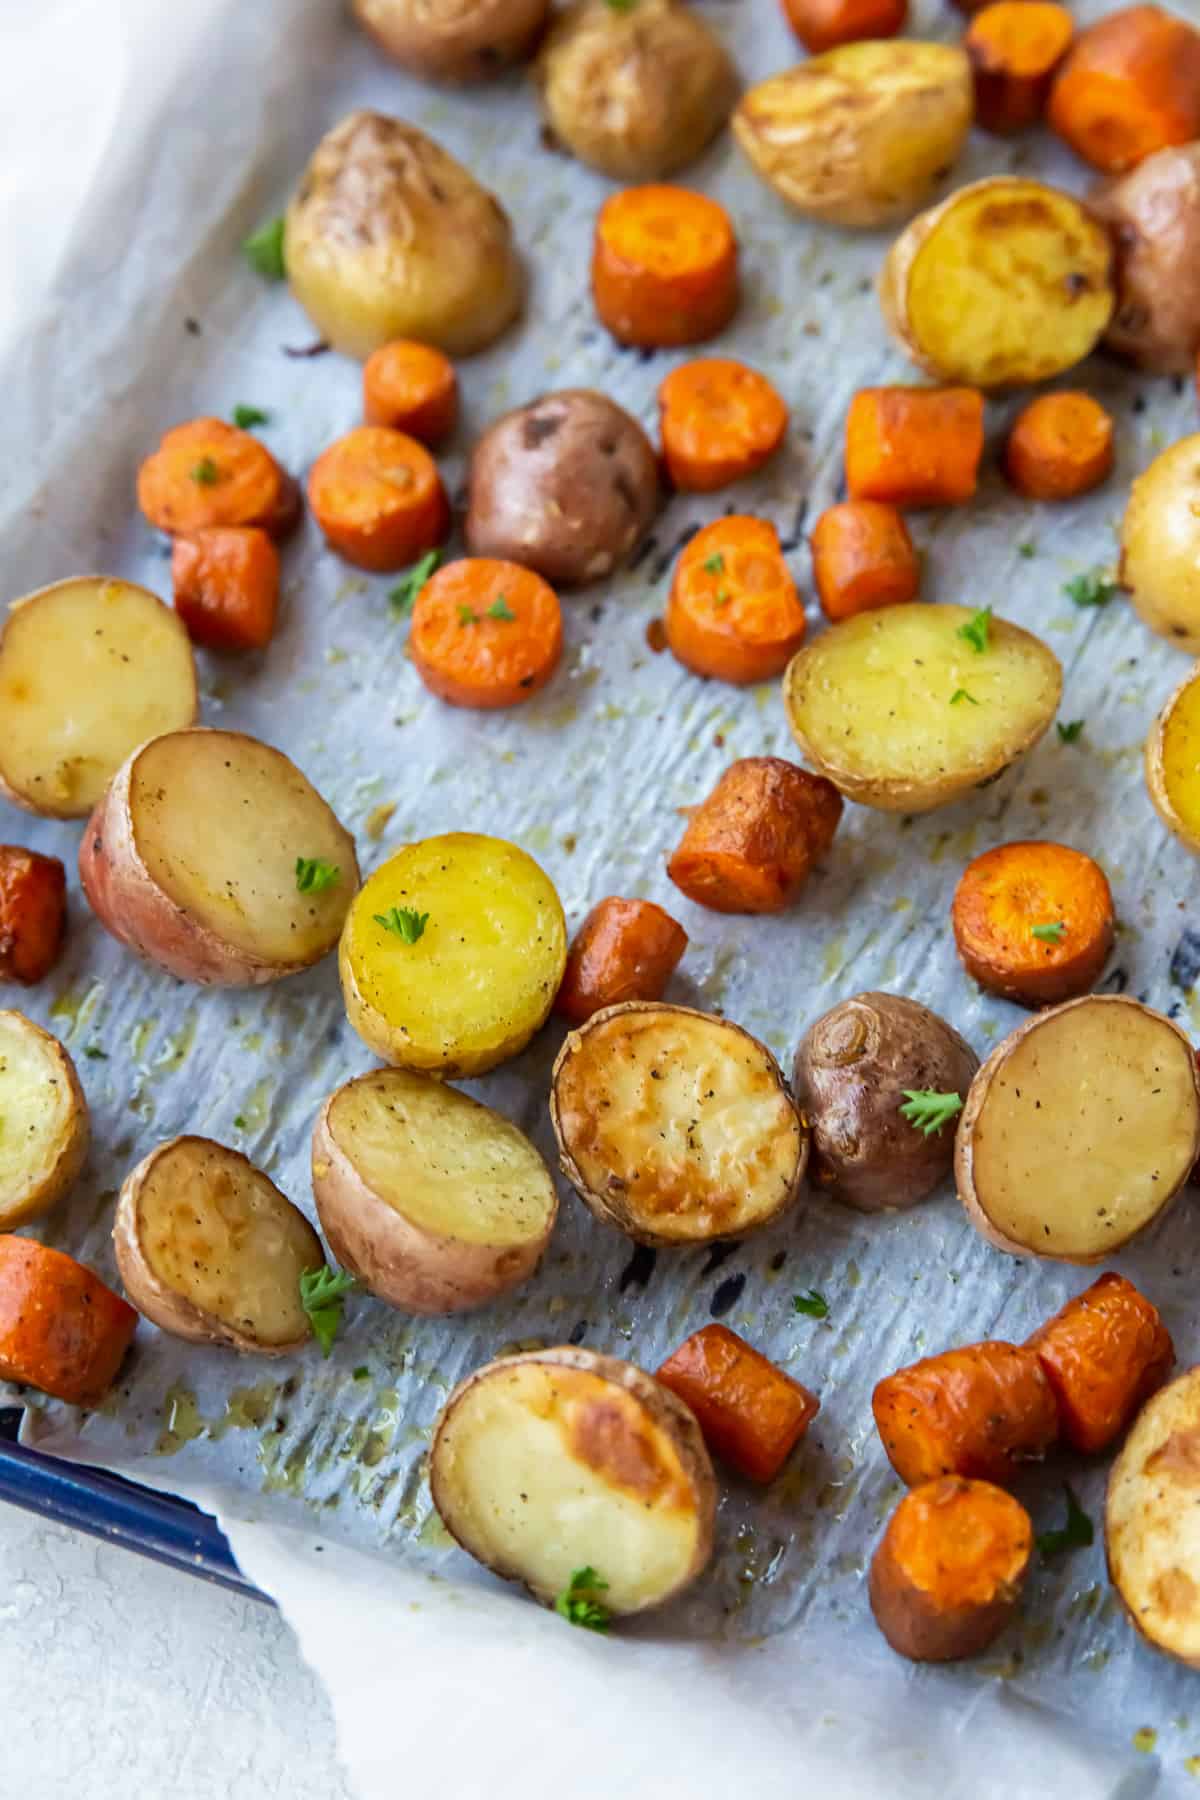 A close up of chunks of roasted carrots and potatoes on a parchment paper lined baking sheet.